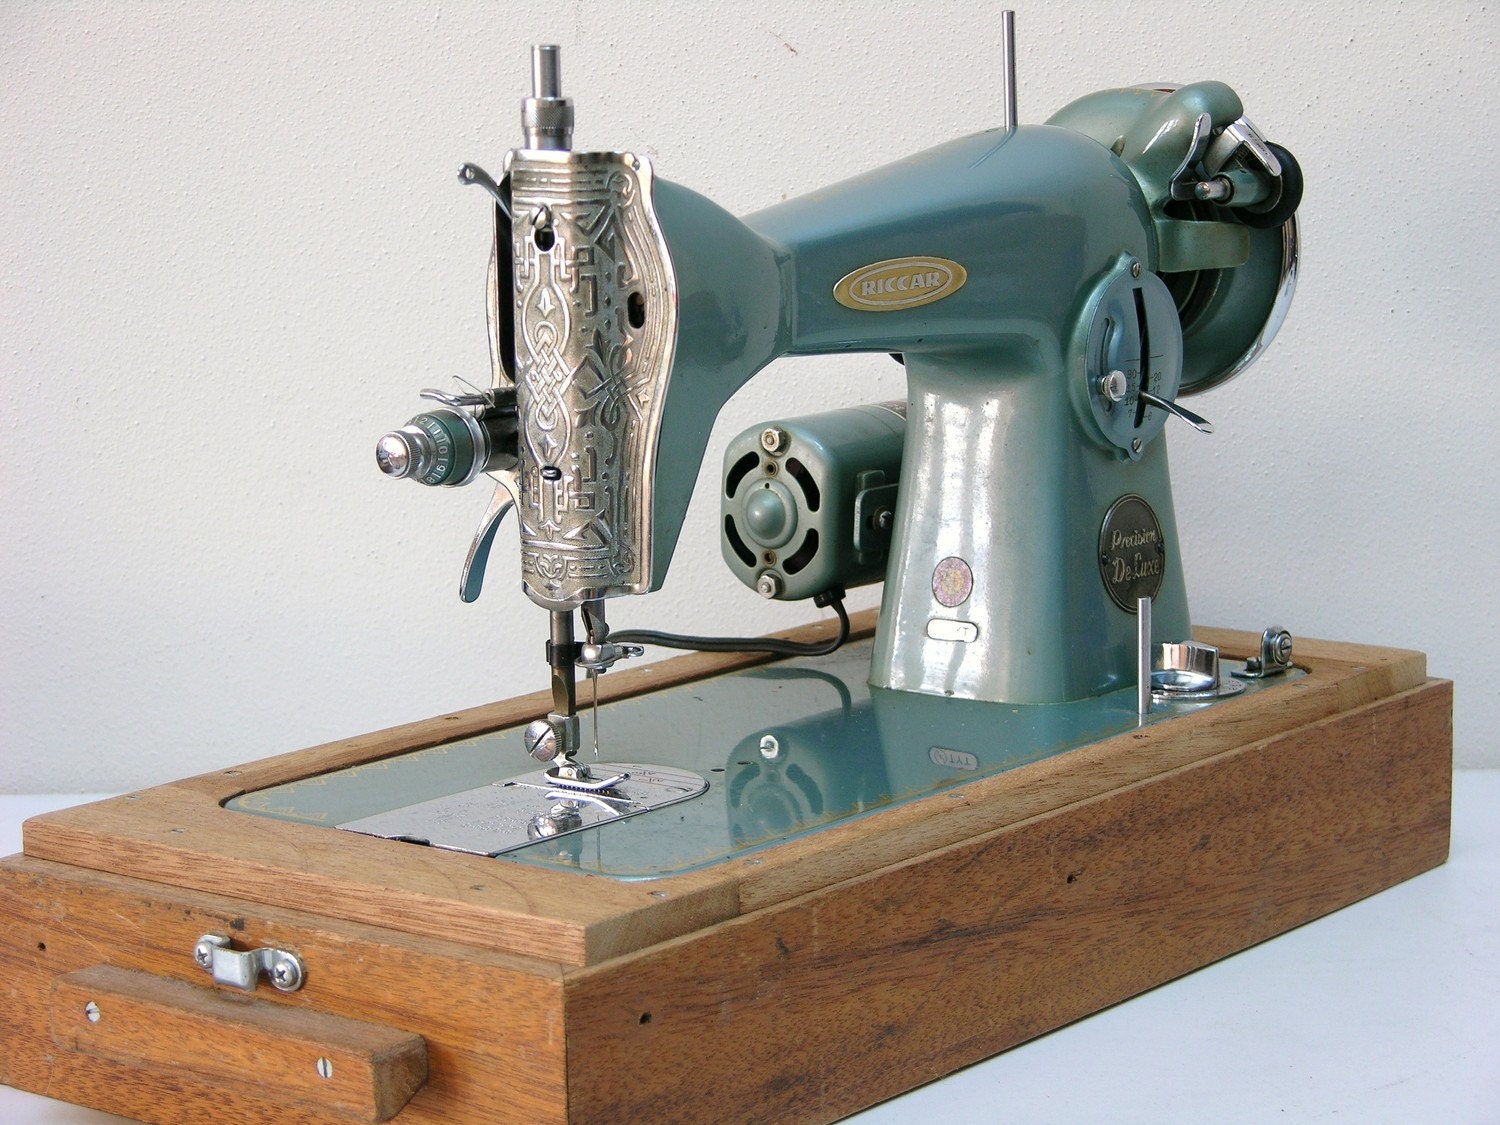 Blue Precision DeLuxe Vintage Sewing Machine by arksendeavors